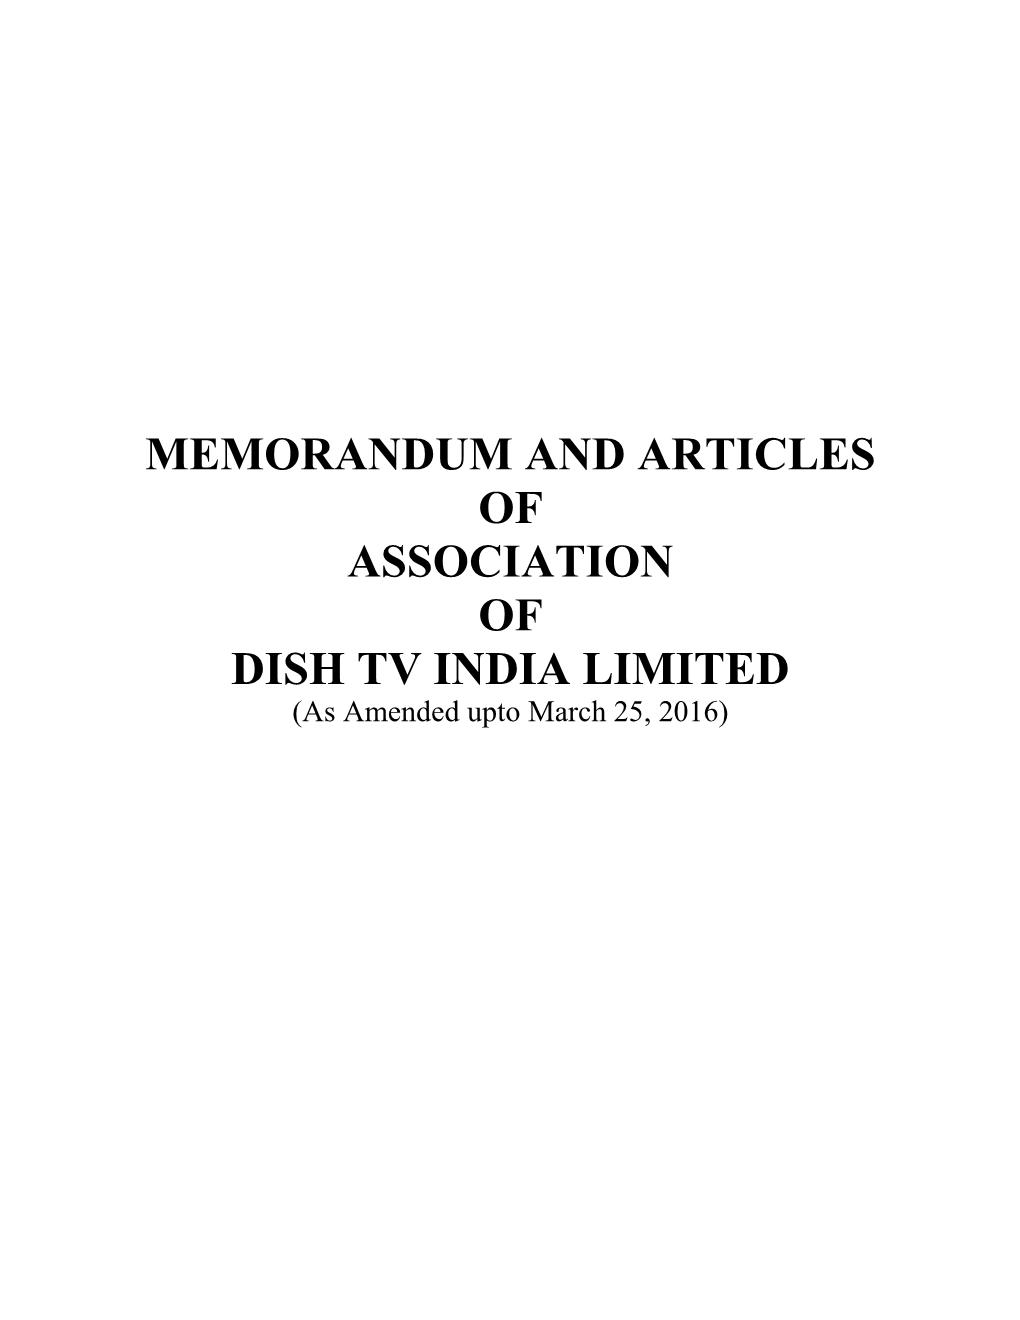 MEMORANDUM and ARTICLES of ASSOCIATION of DISH TV INDIA LIMITED (As Amended Upto March 25, 2016) 1 2 3 4 5